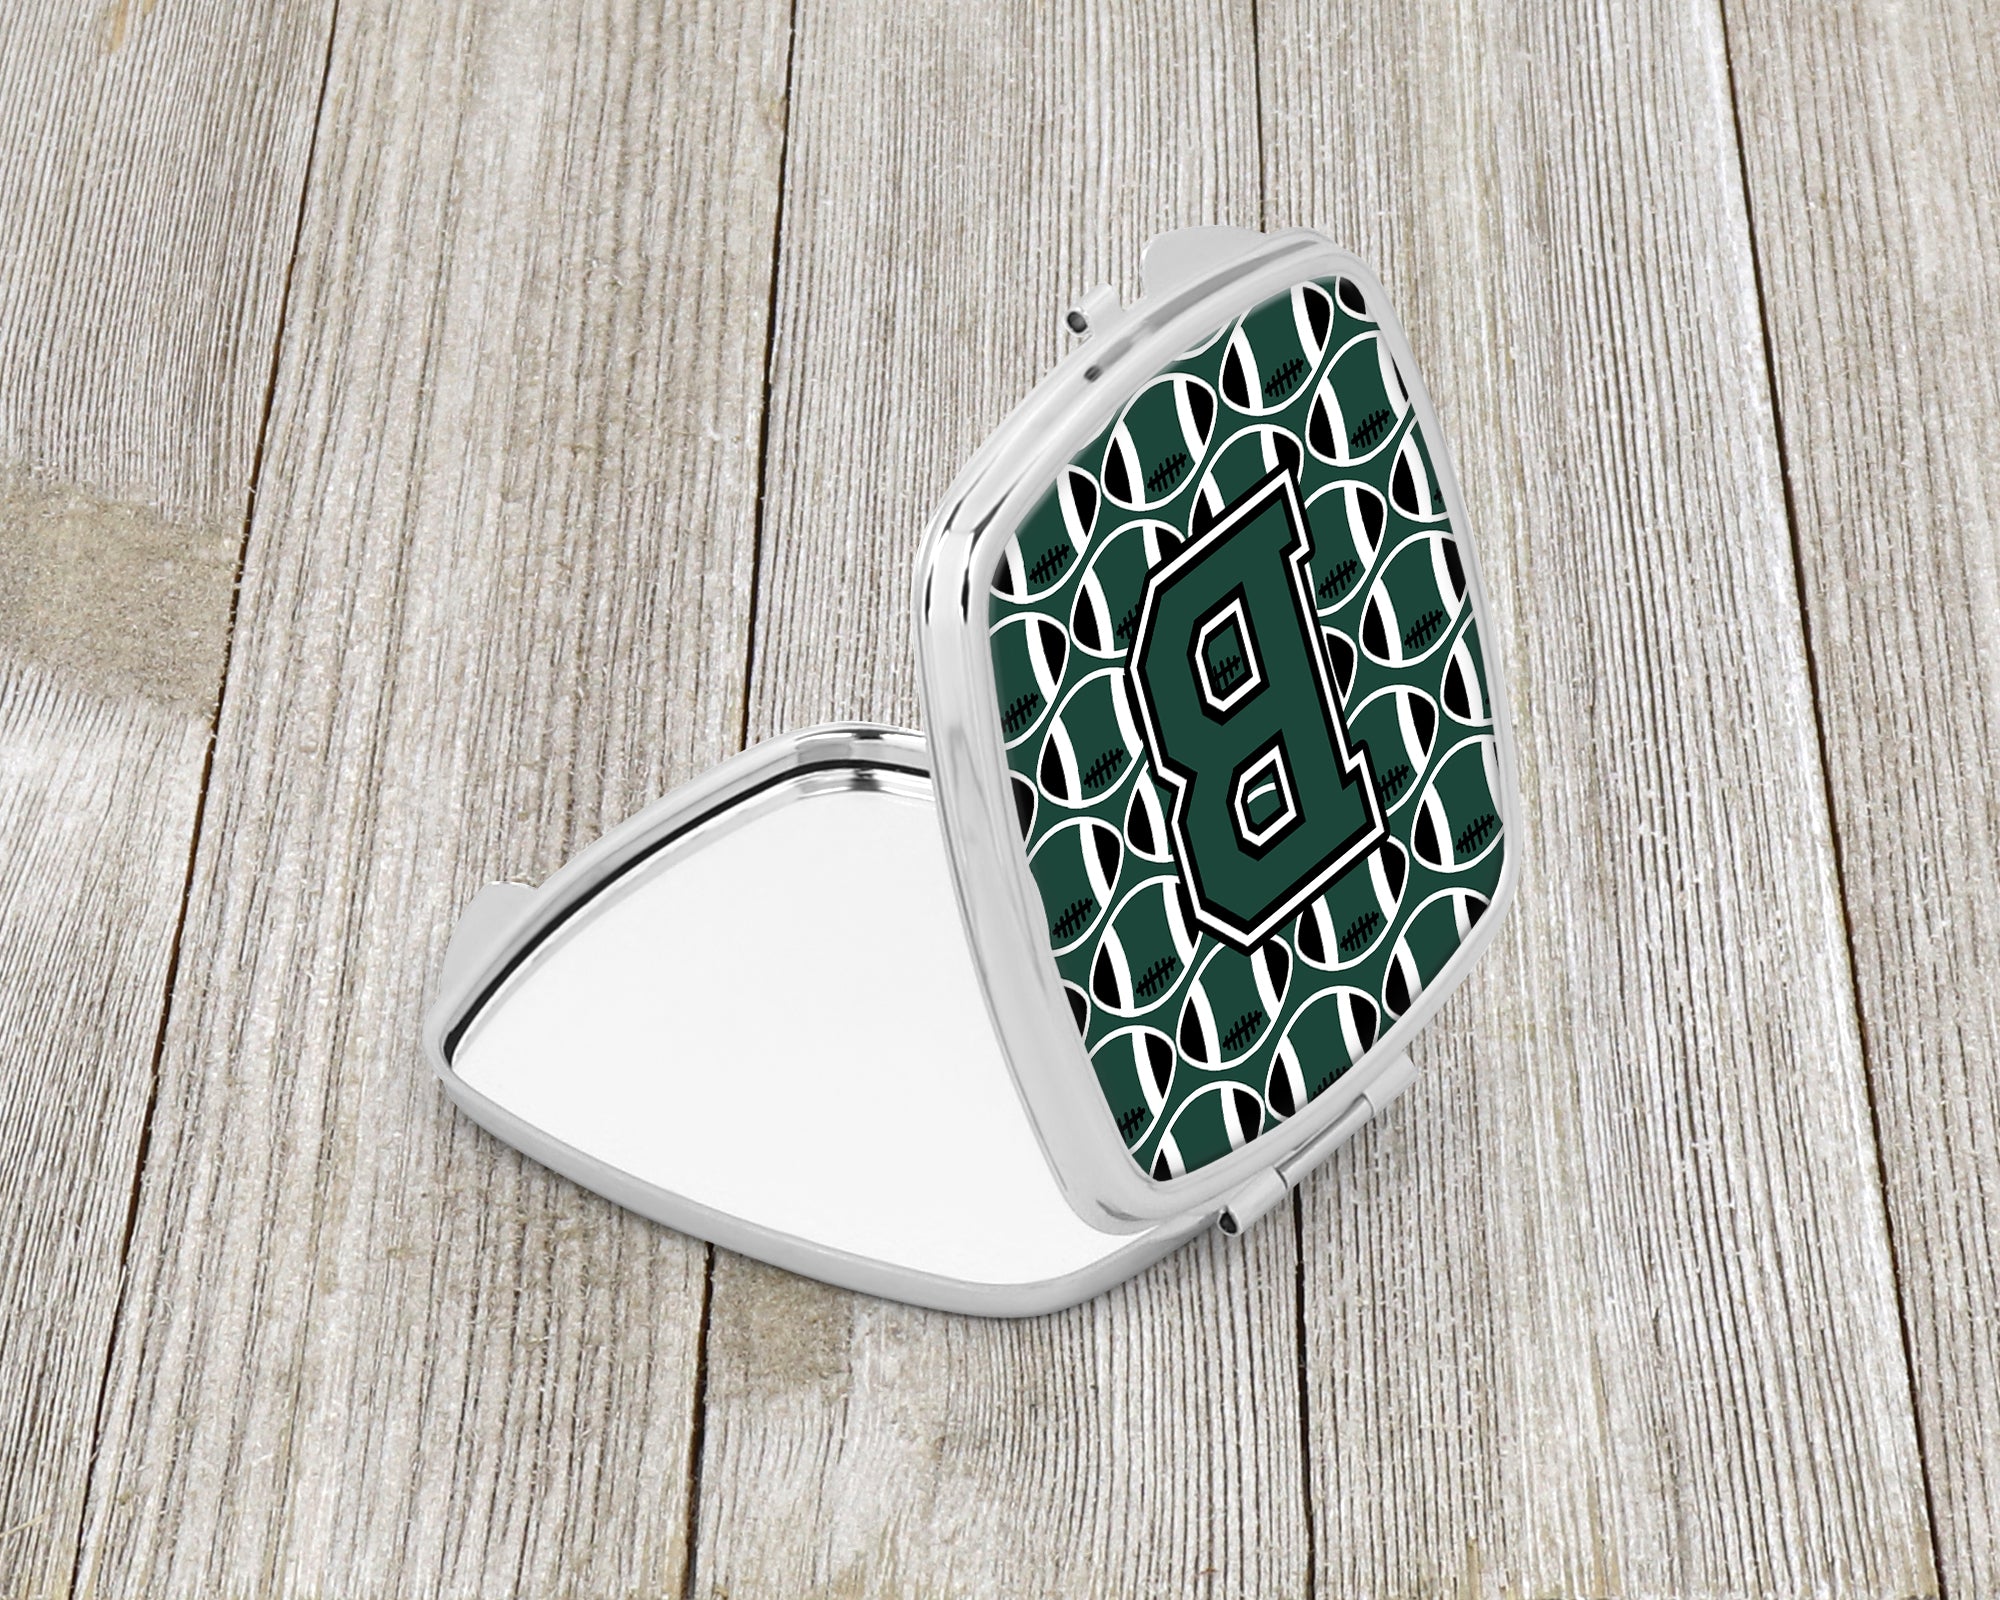 Letter B Football Green and White Compact Mirror CJ1071-BSCM